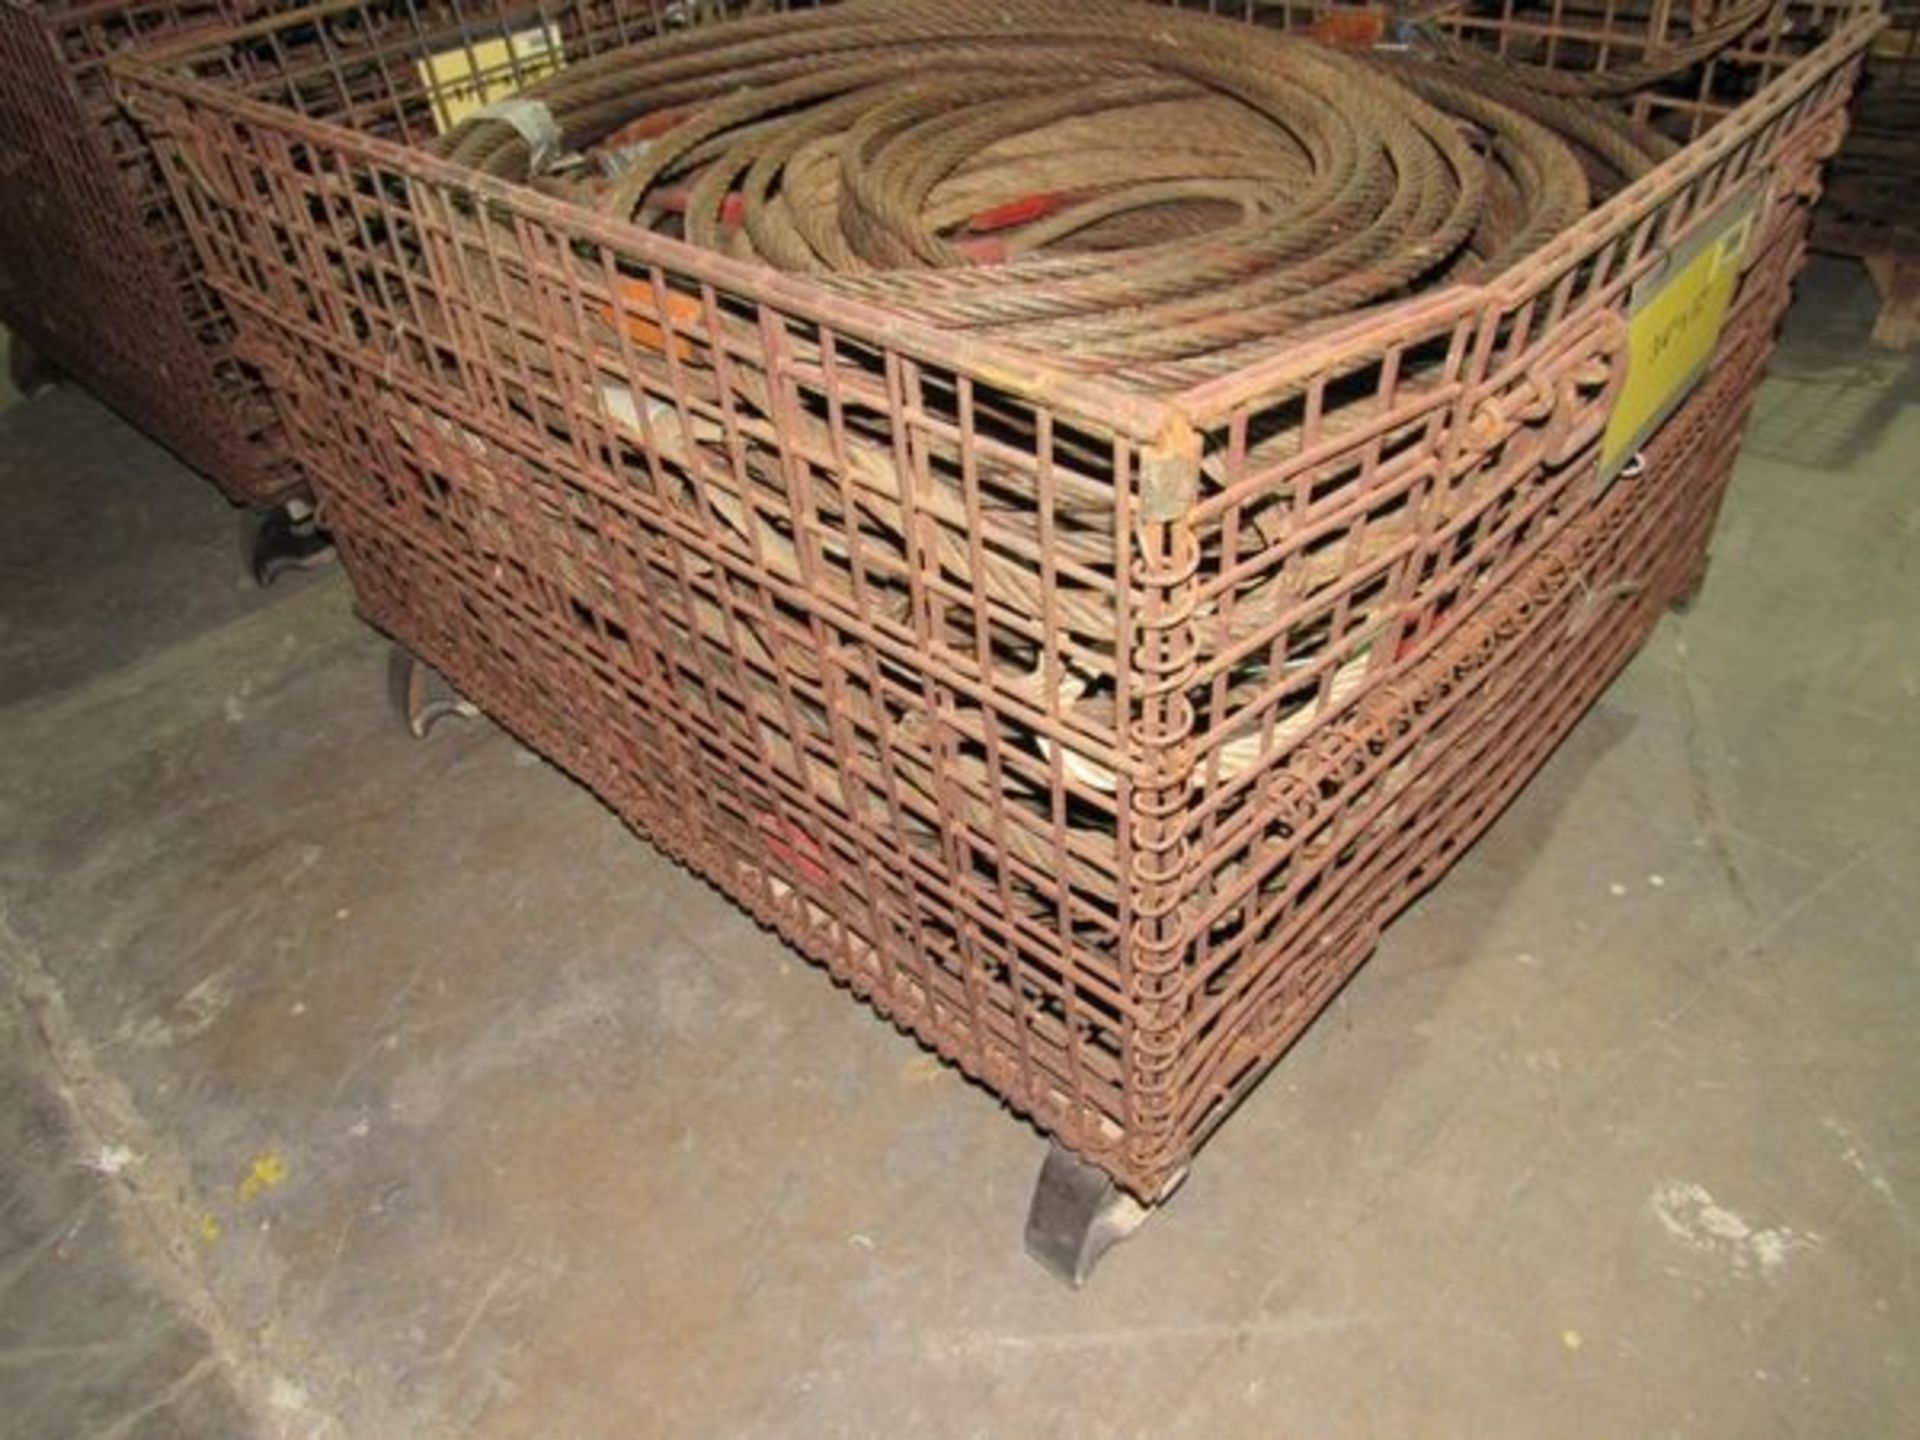 Warehouse Basket- MFR - Unknown 48" x 40" x 31" **Contents SOLD Separately in Lot #1211** - Image 3 of 8